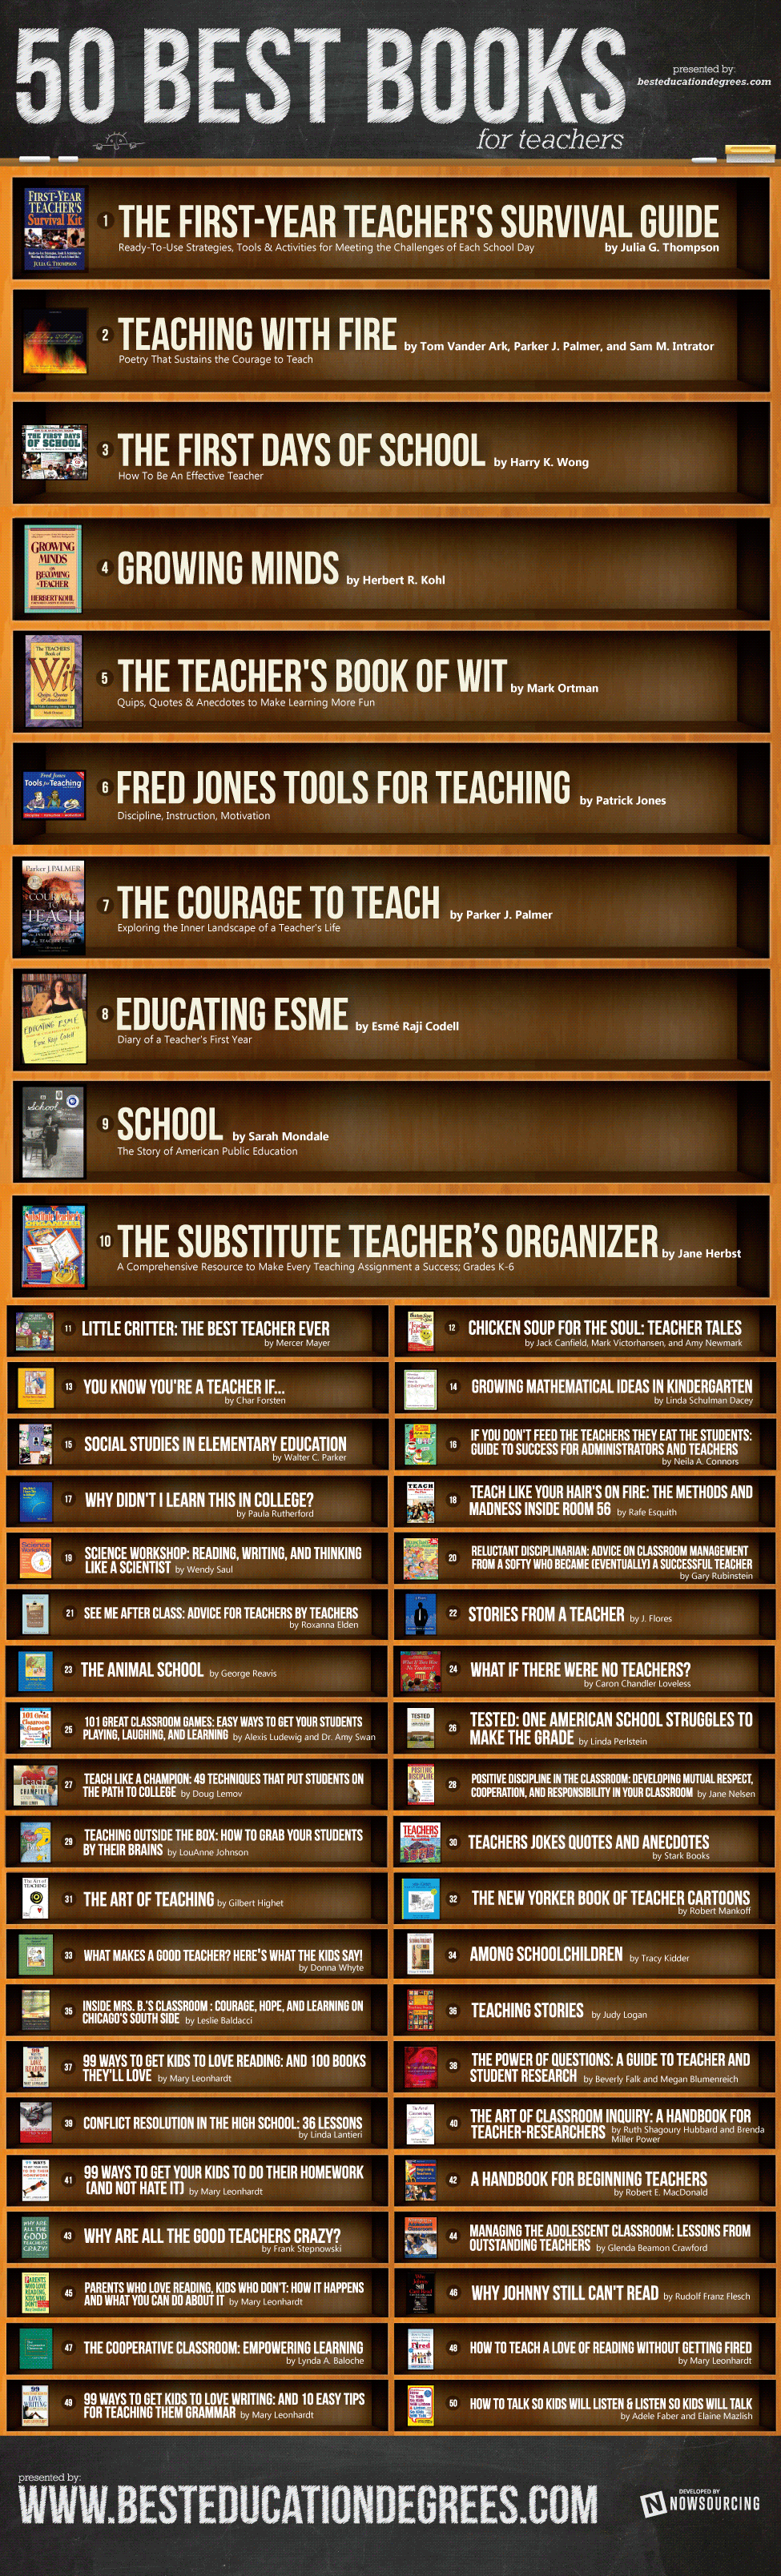 The-Top-50-Books-For-Teachers-Infographic